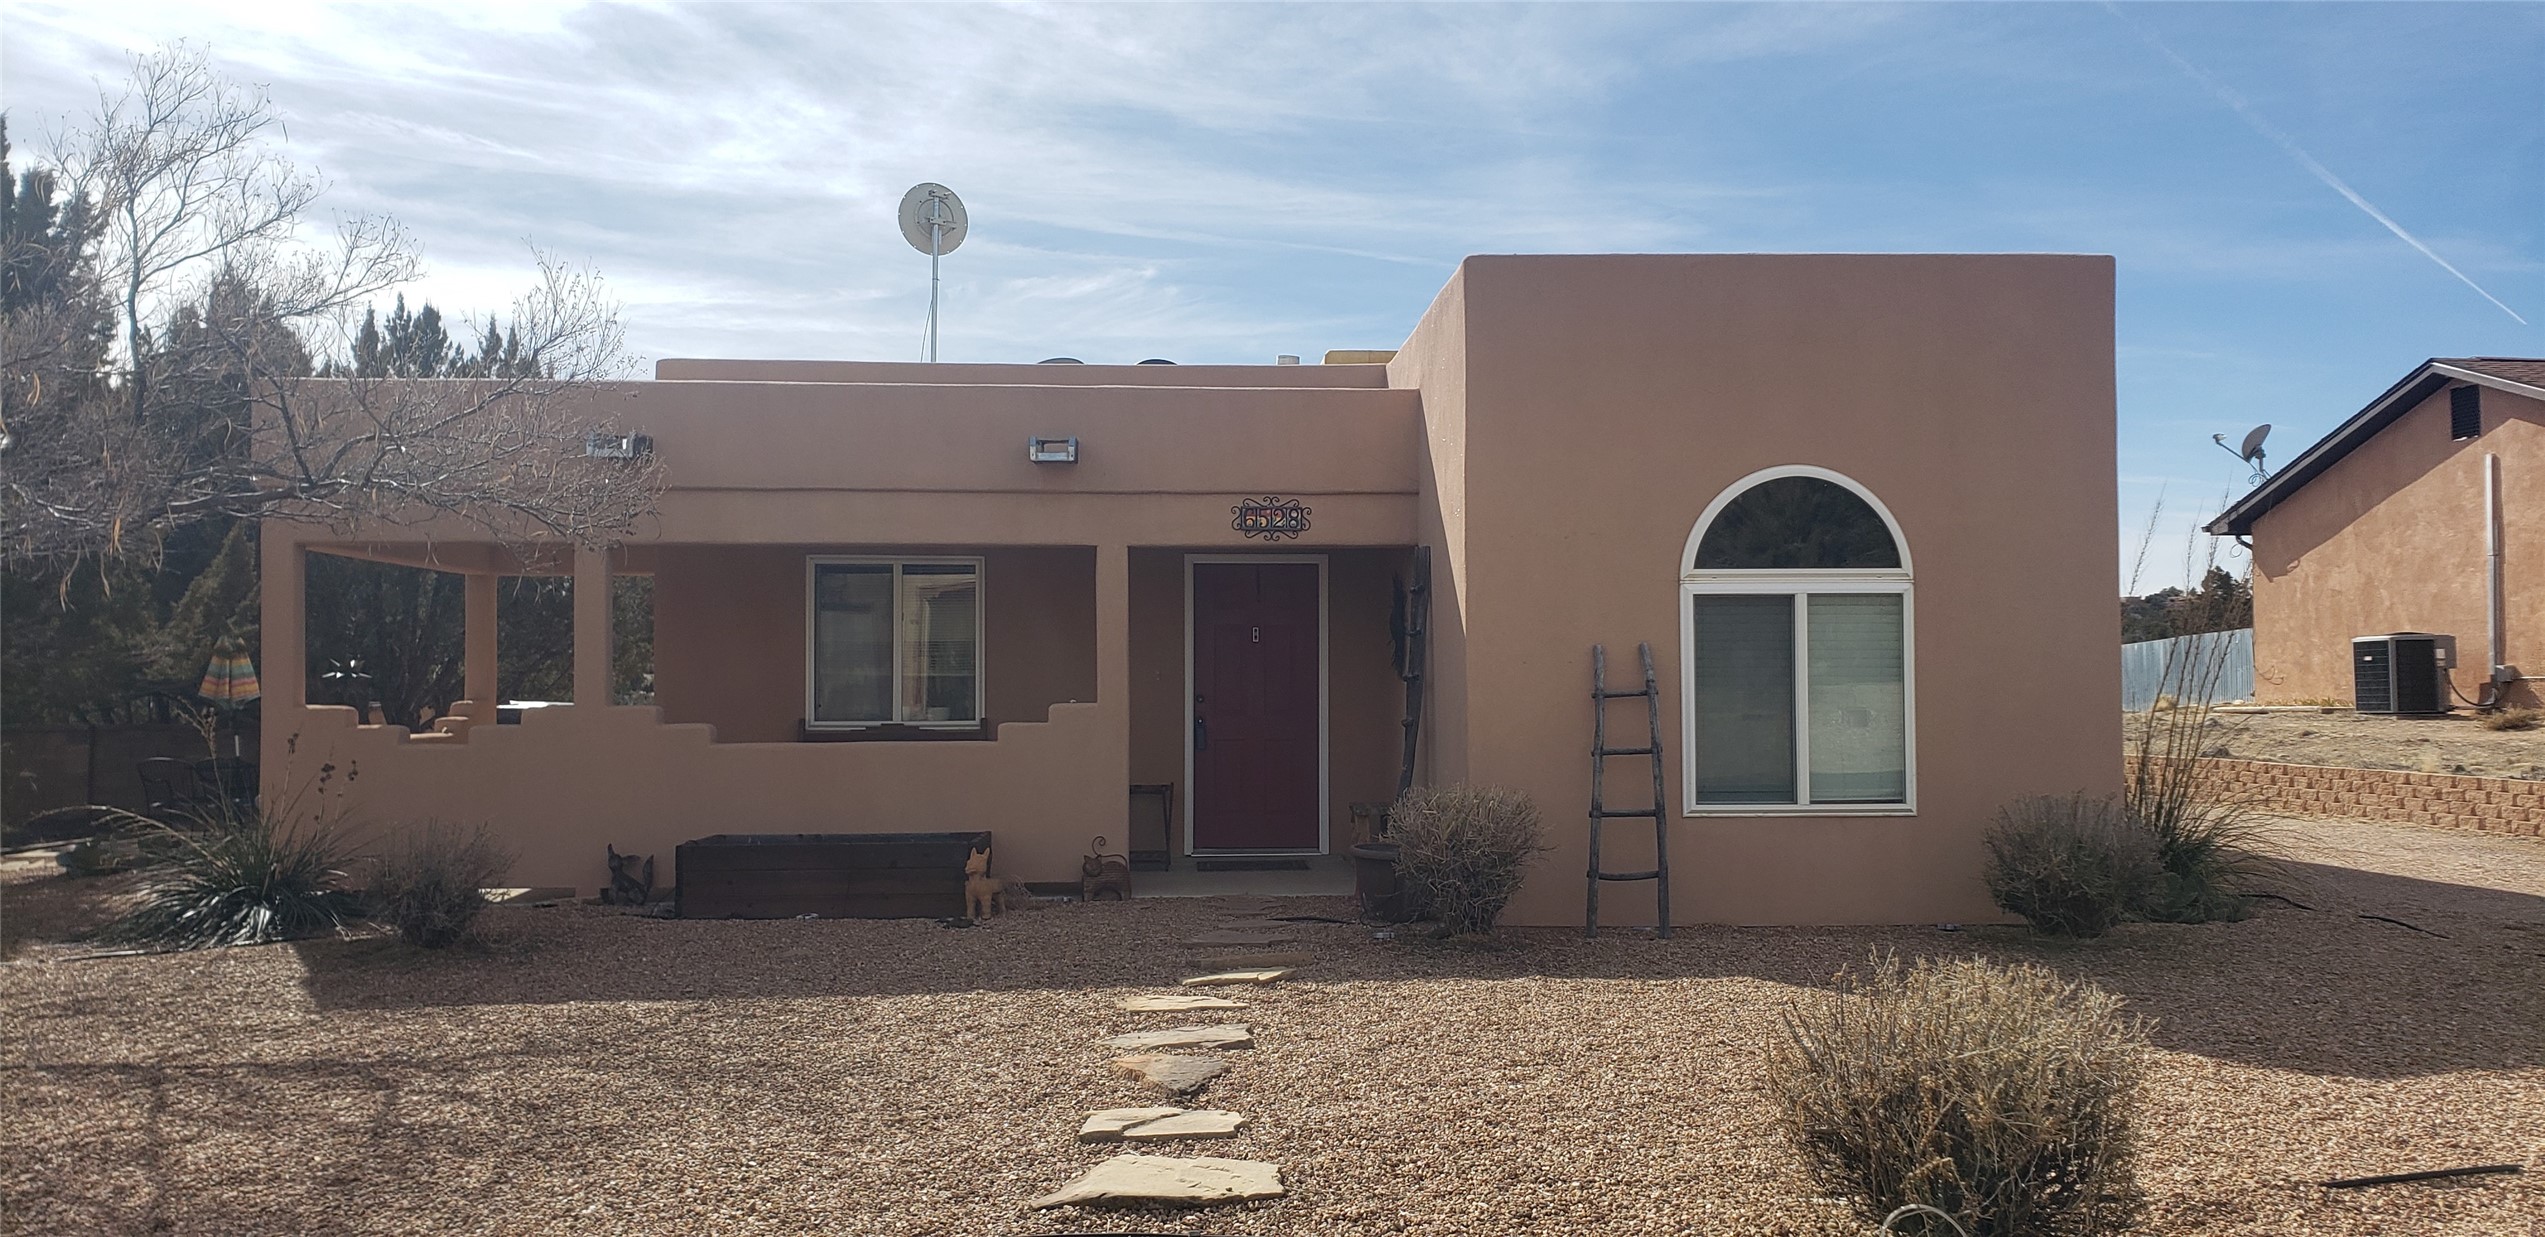 6528 Horseshoe, Cochiti, New Mexico 87083, 3 Bedrooms Bedrooms, ,2 BathroomsBathrooms,Residential,For Sale,6528 Horseshoe,202335039